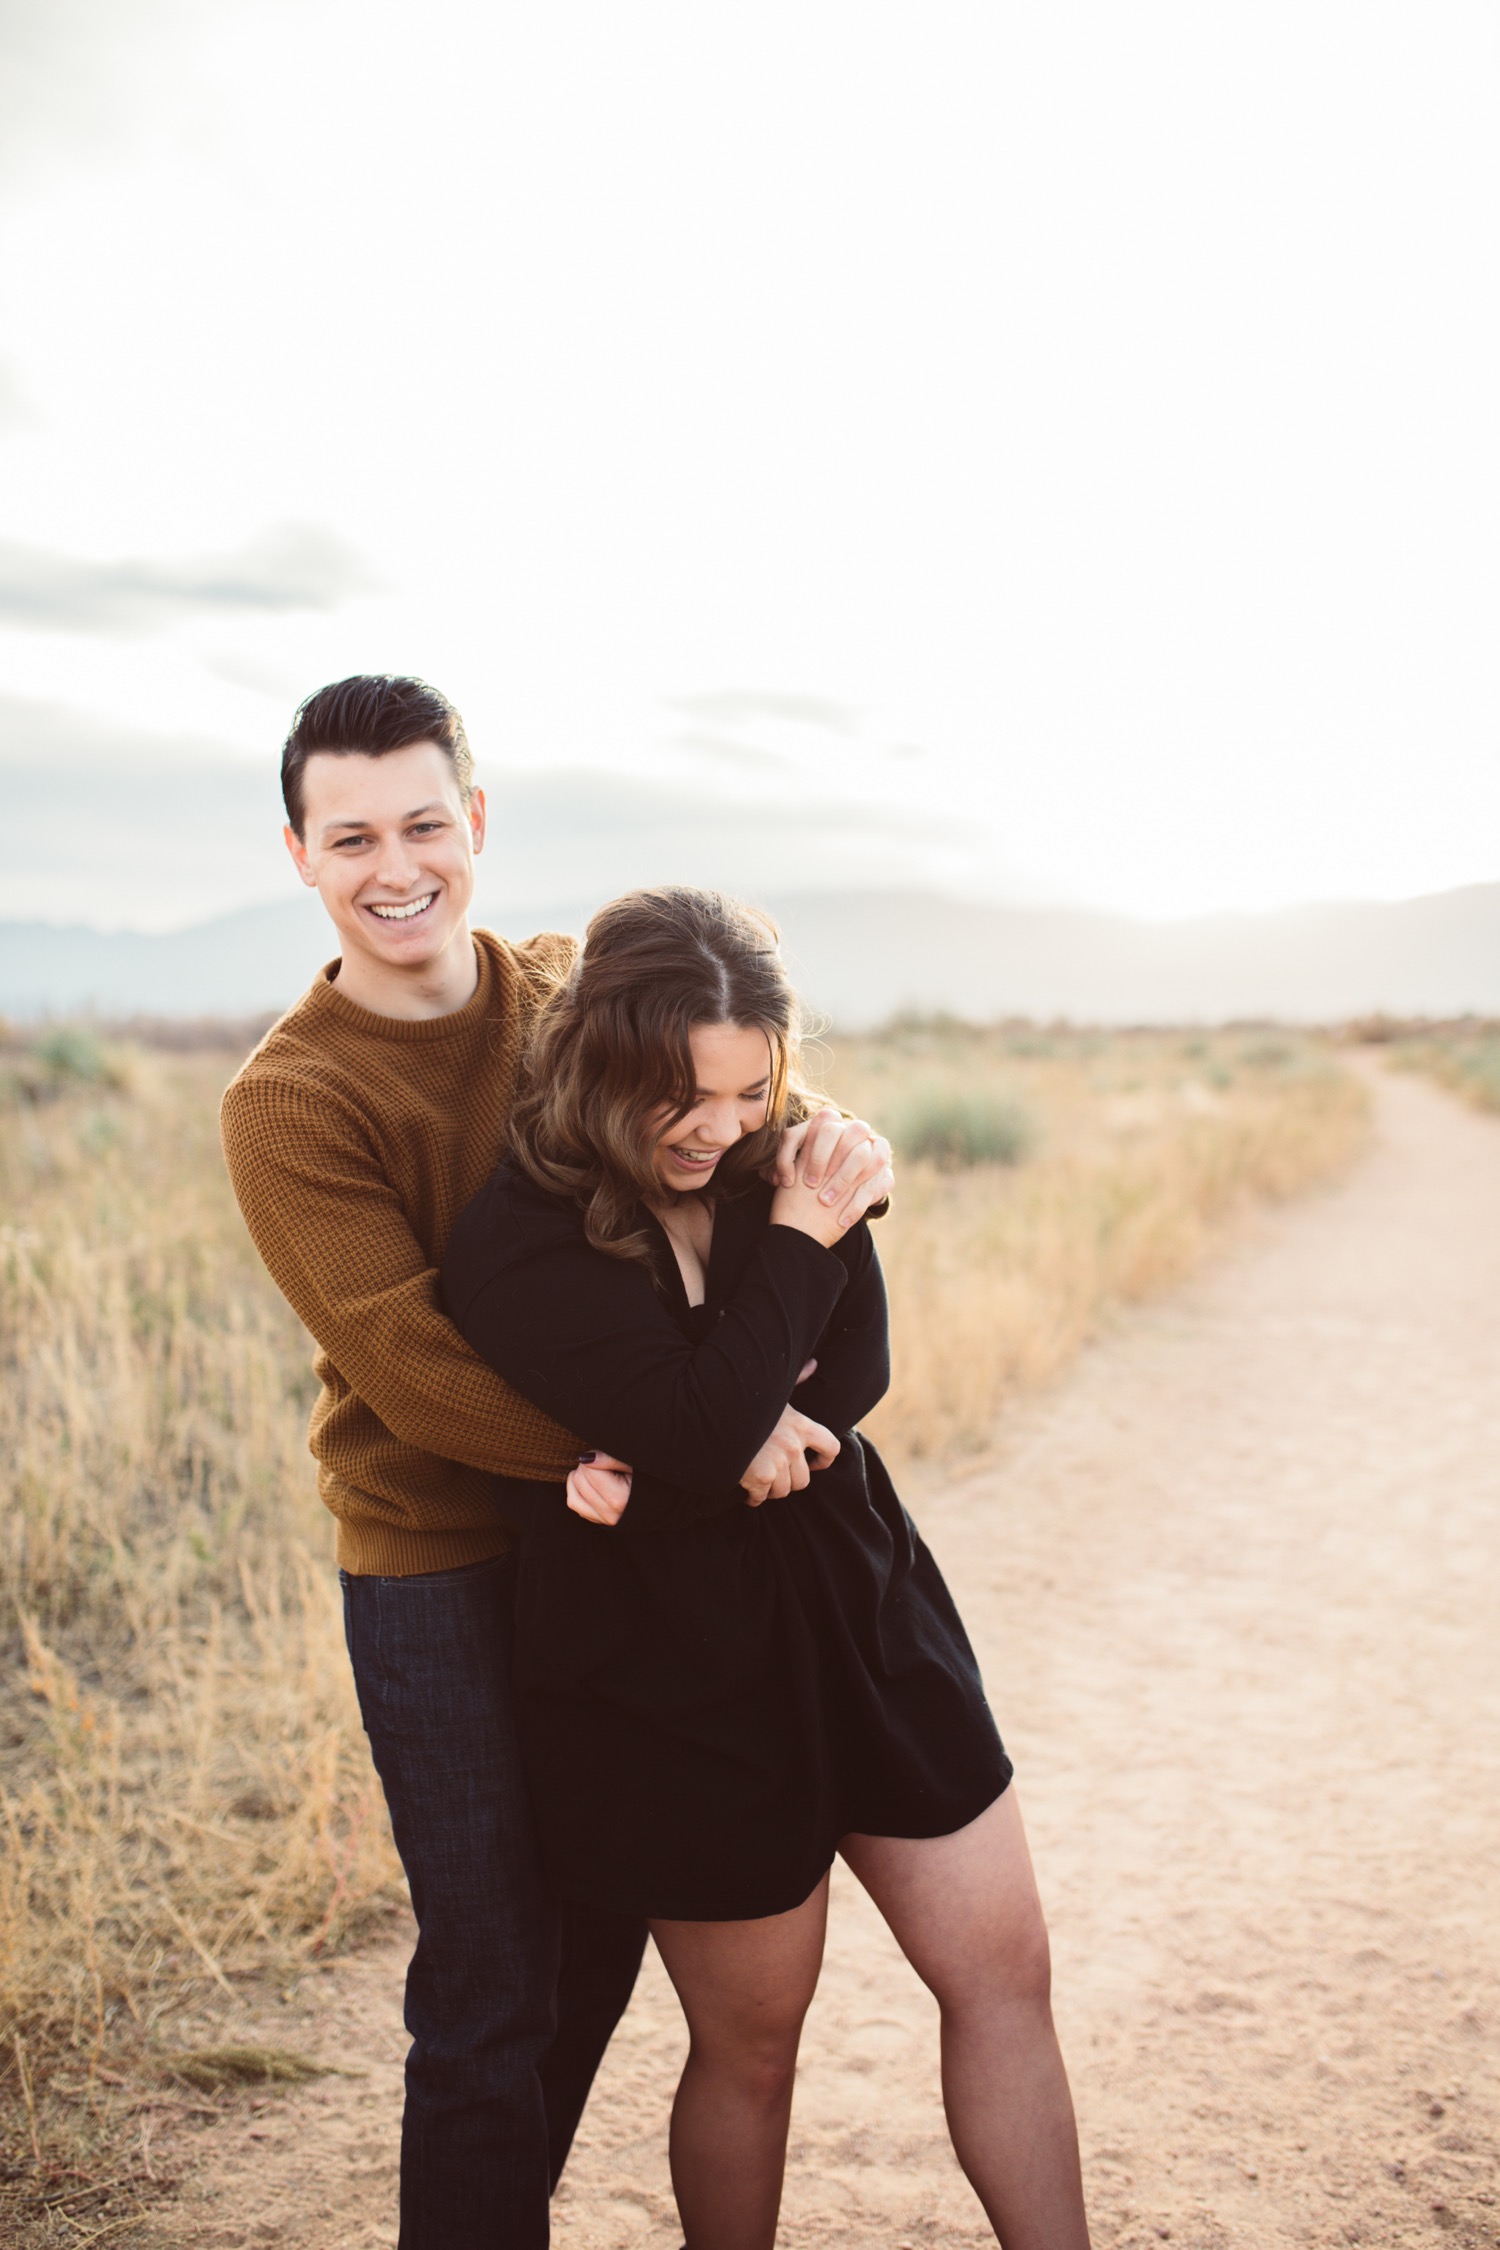 Couples session - Taylored Eye Photography